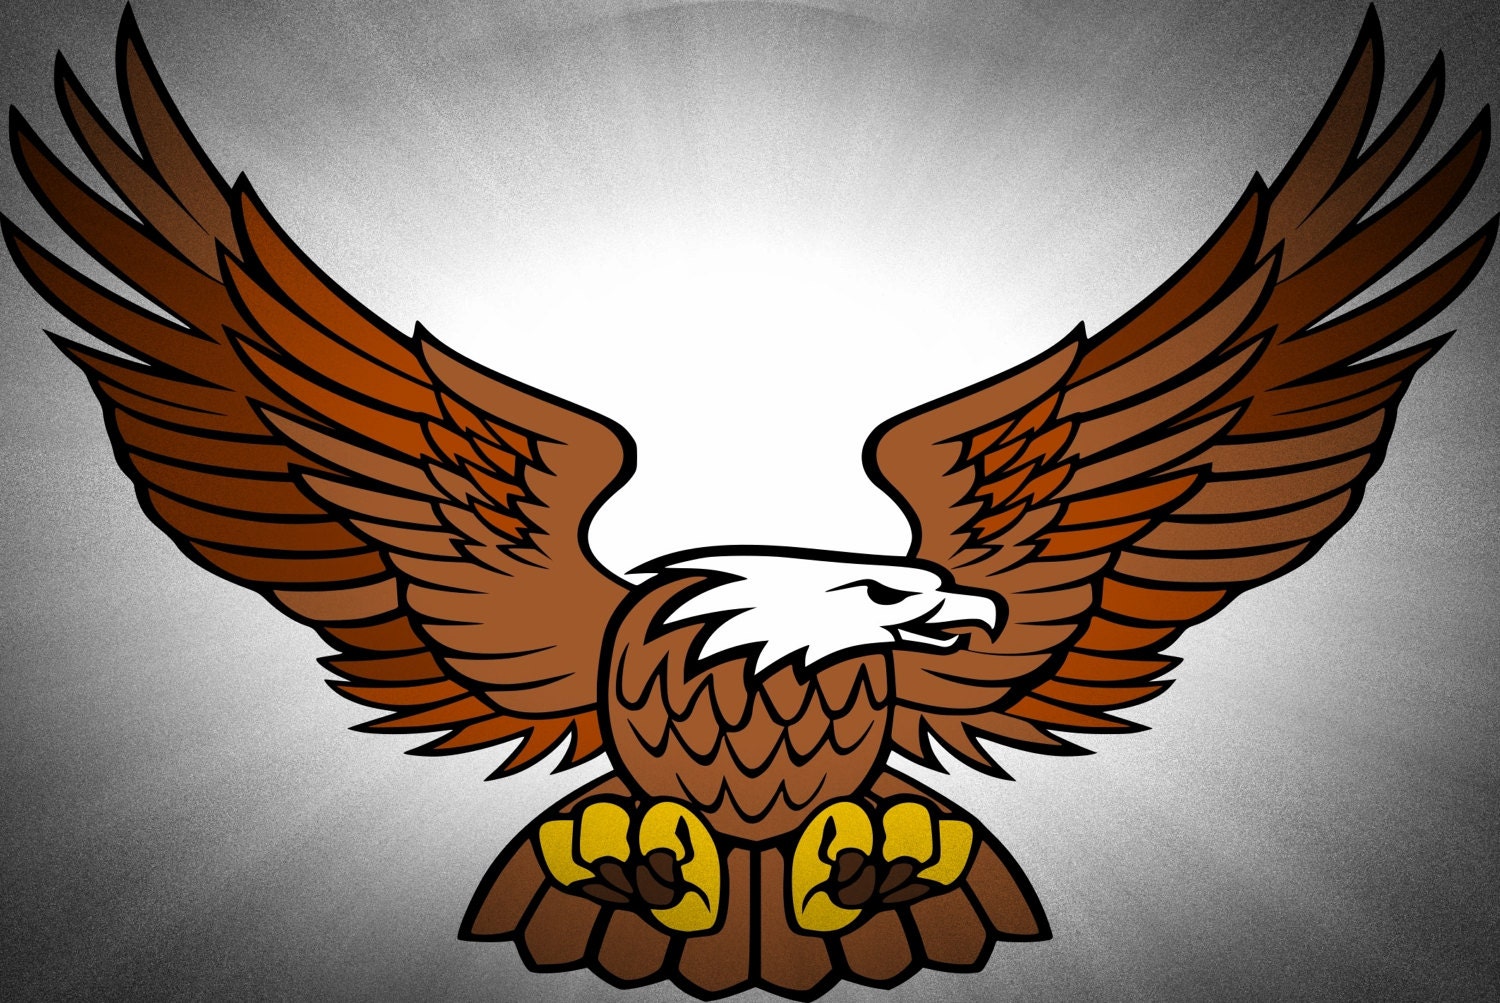 Download Layered Eagle Svg - Layered SVG Cut File - Best Free ...